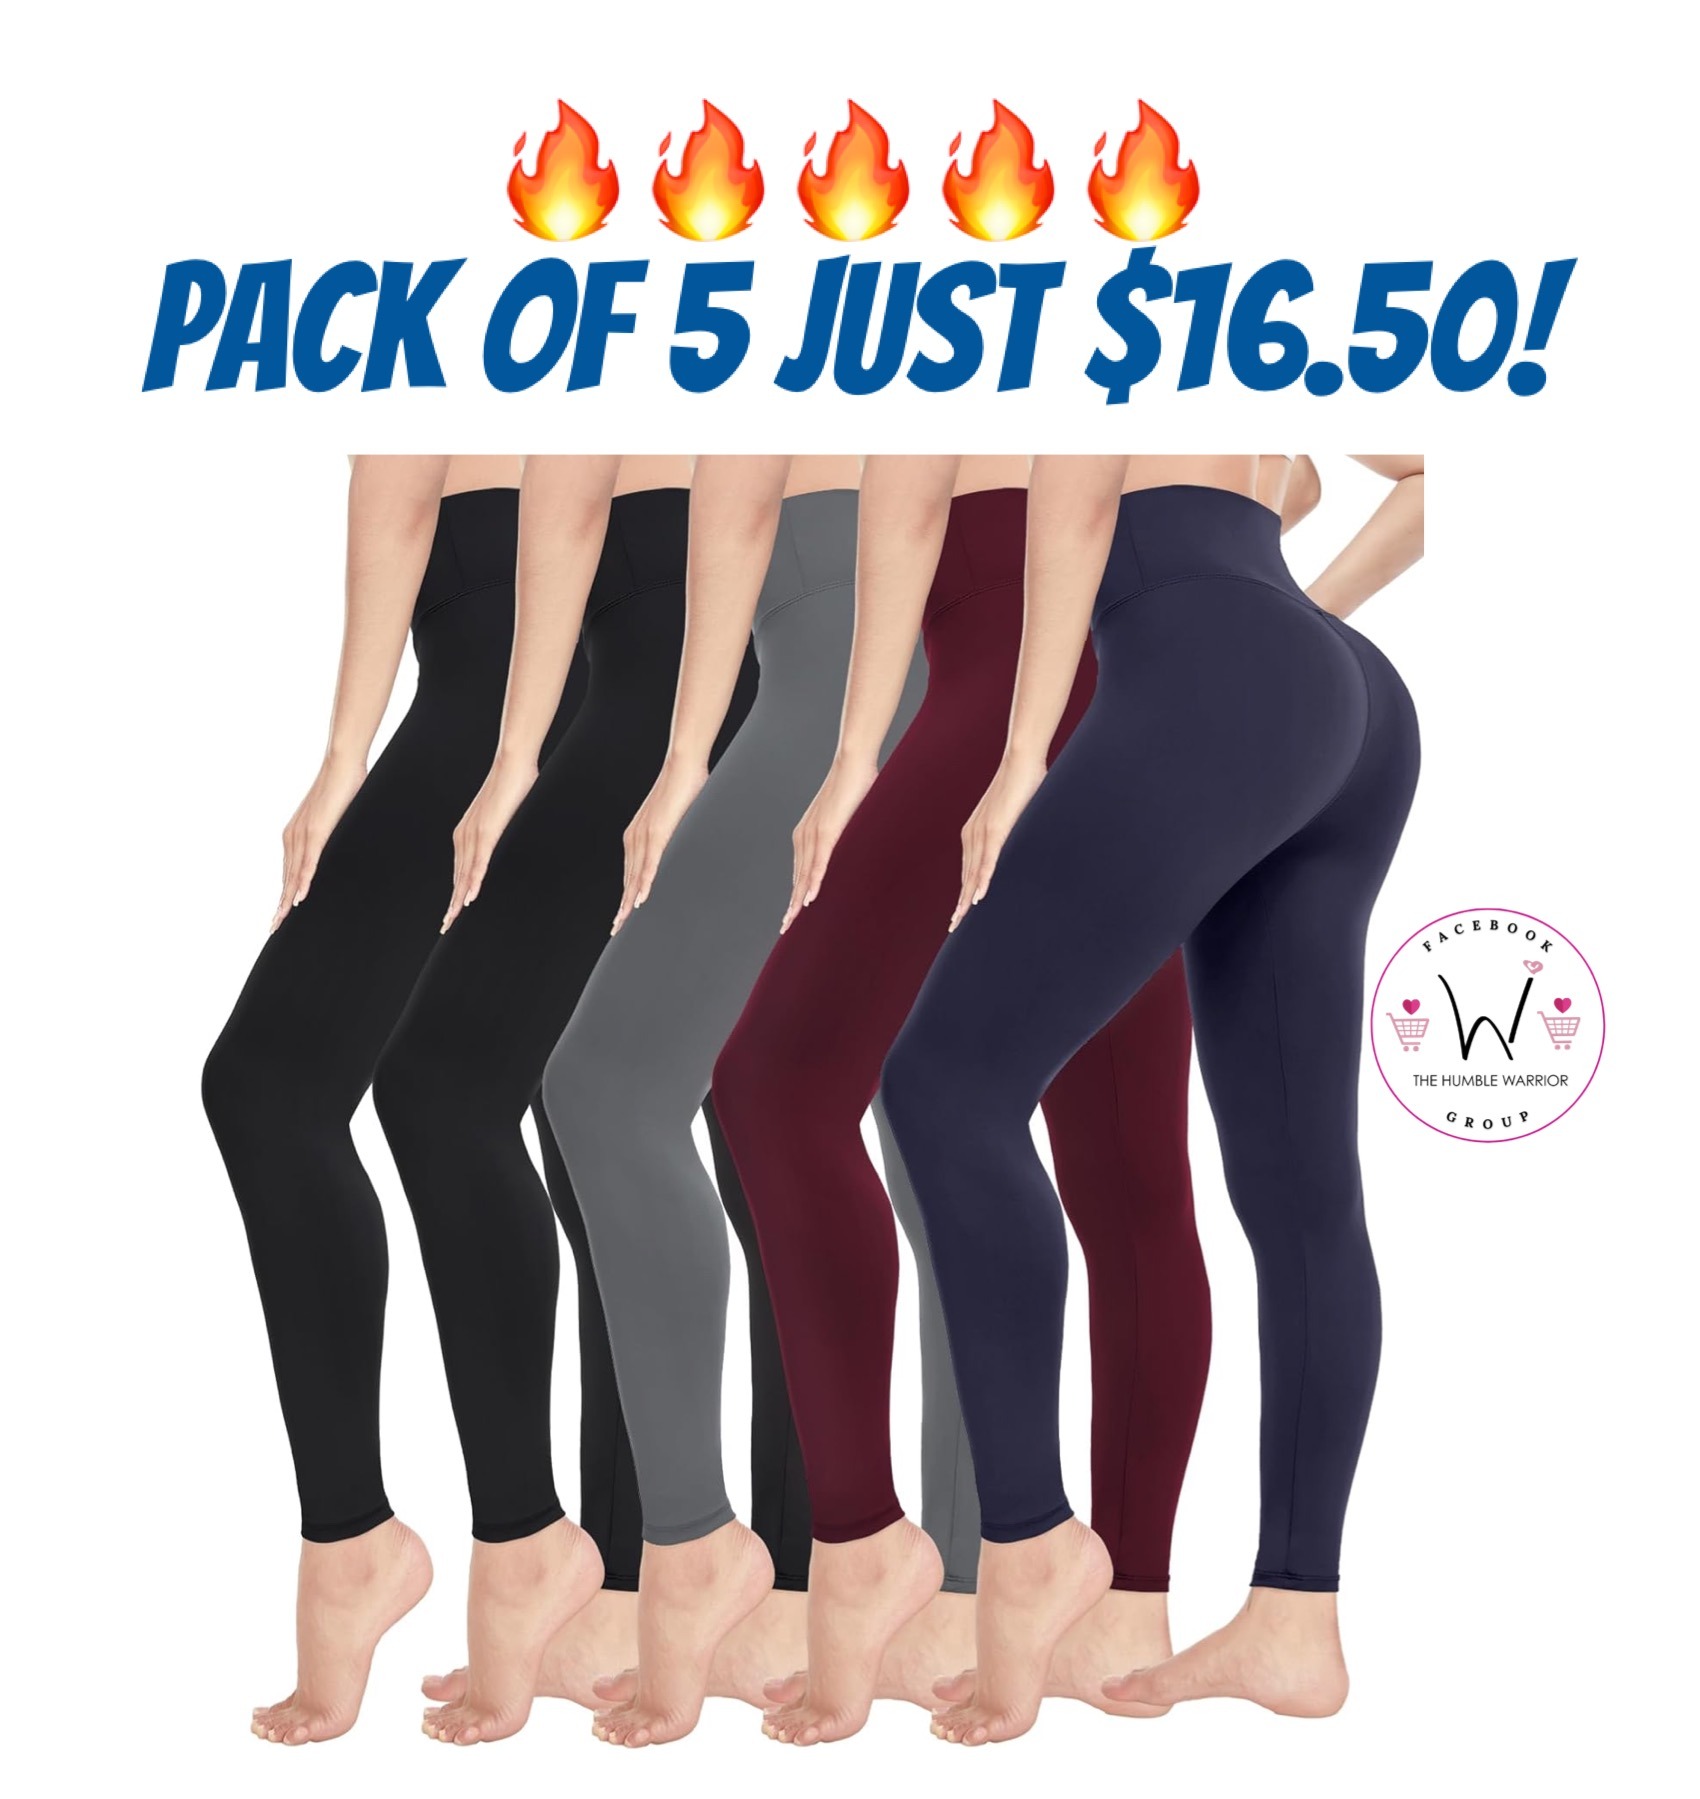 NexiEpoch Leggings - Home of The Humble Warrior